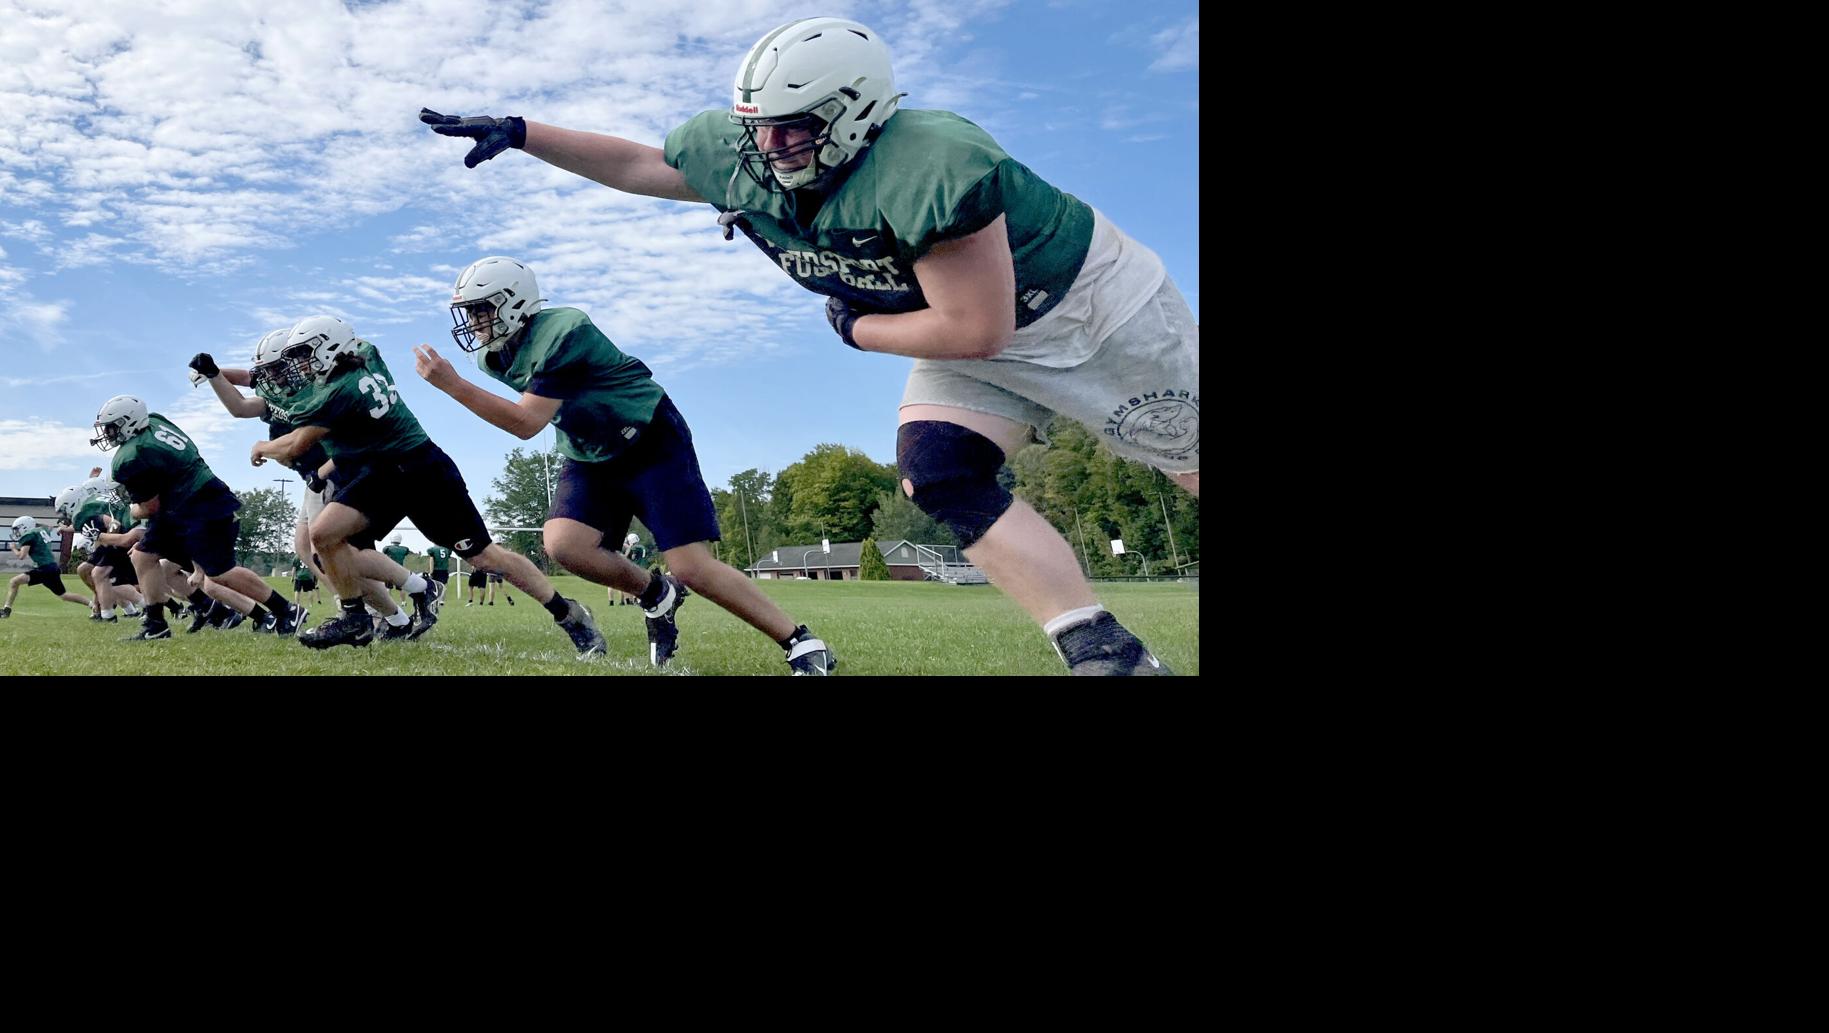 Back in session: Cayuga County high school programs return to practice for  upcoming season